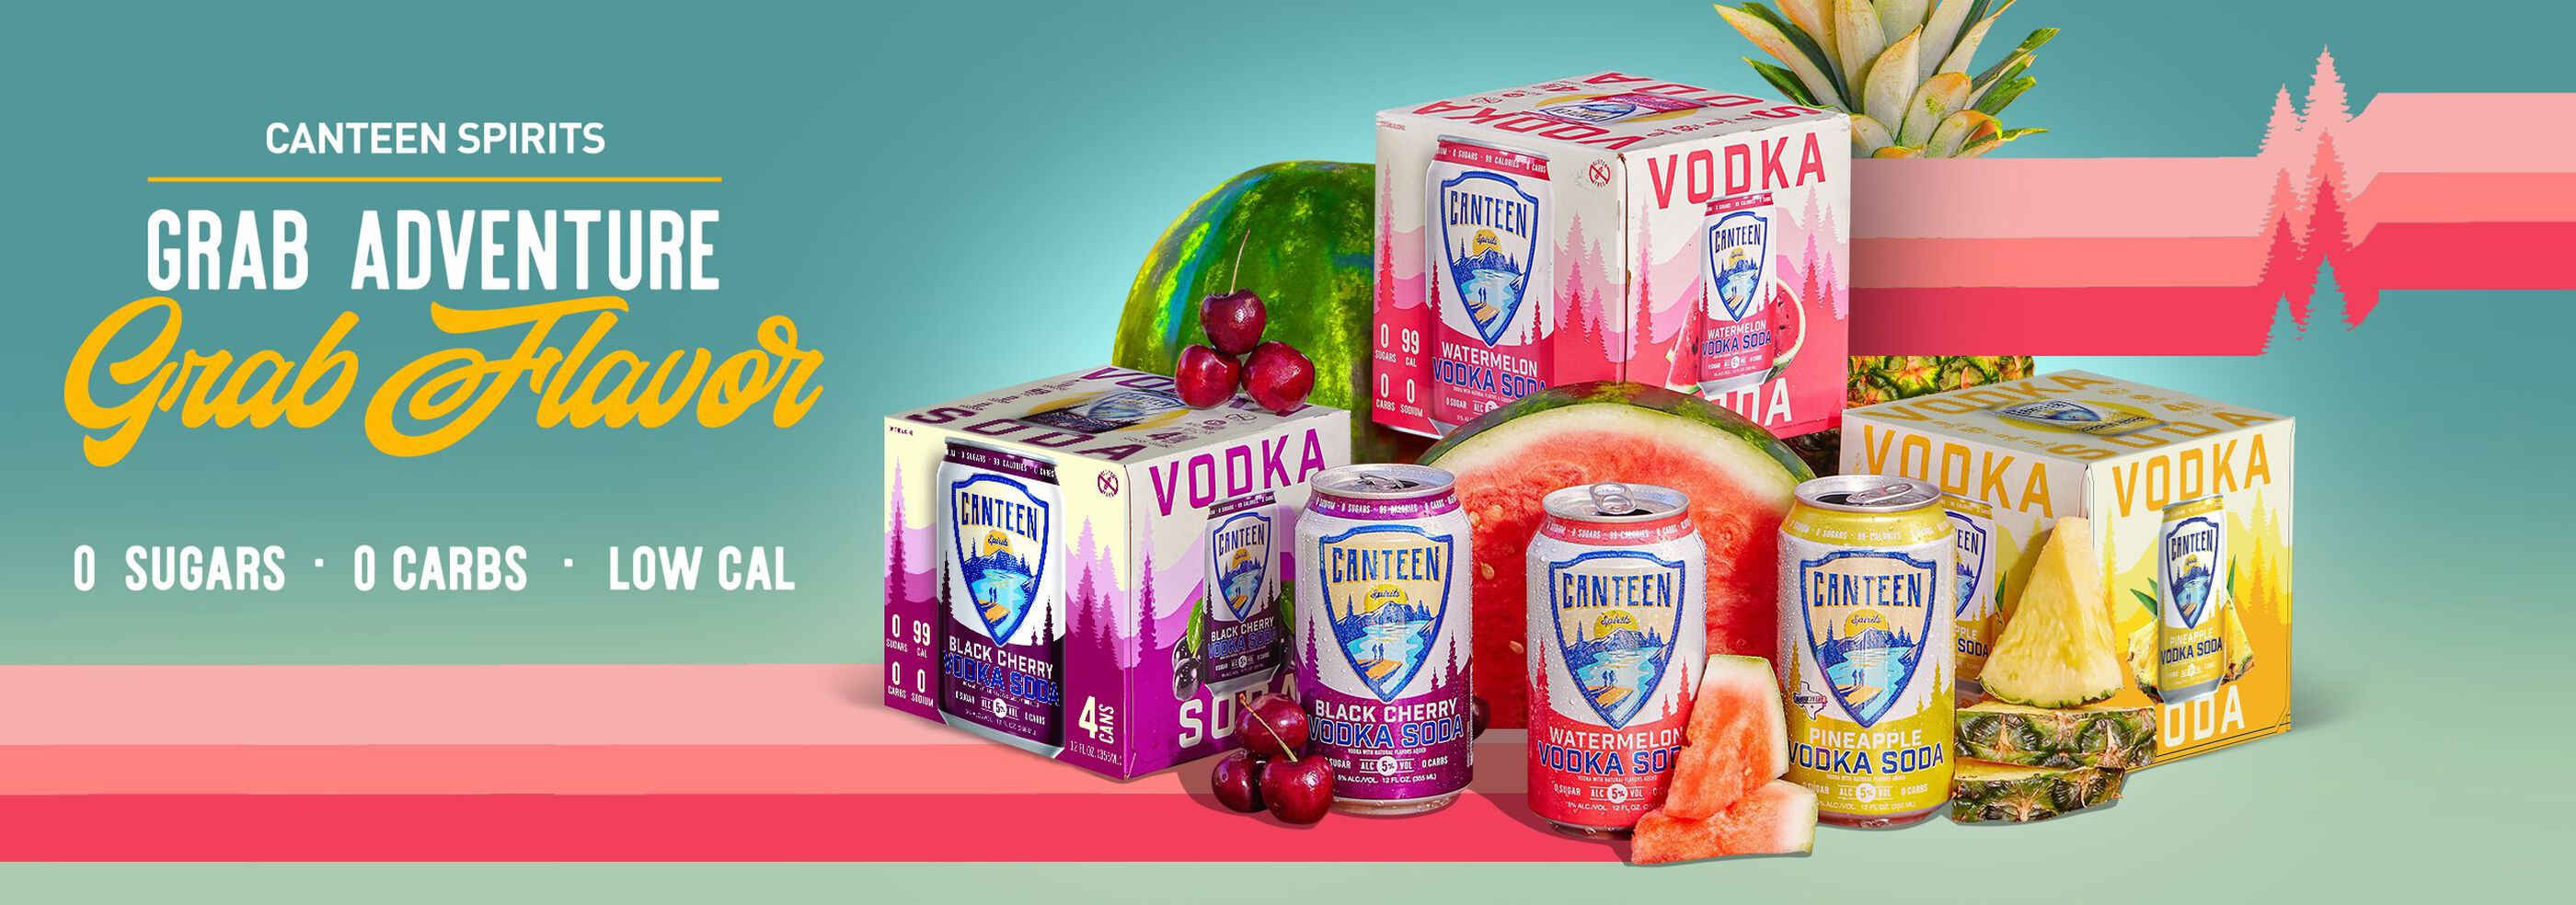 Canteen products with Copy: Canteen Spirits - Grab Adventure, Grab Flavor. 0 Sugars, 0 Carbs, Low Cal.